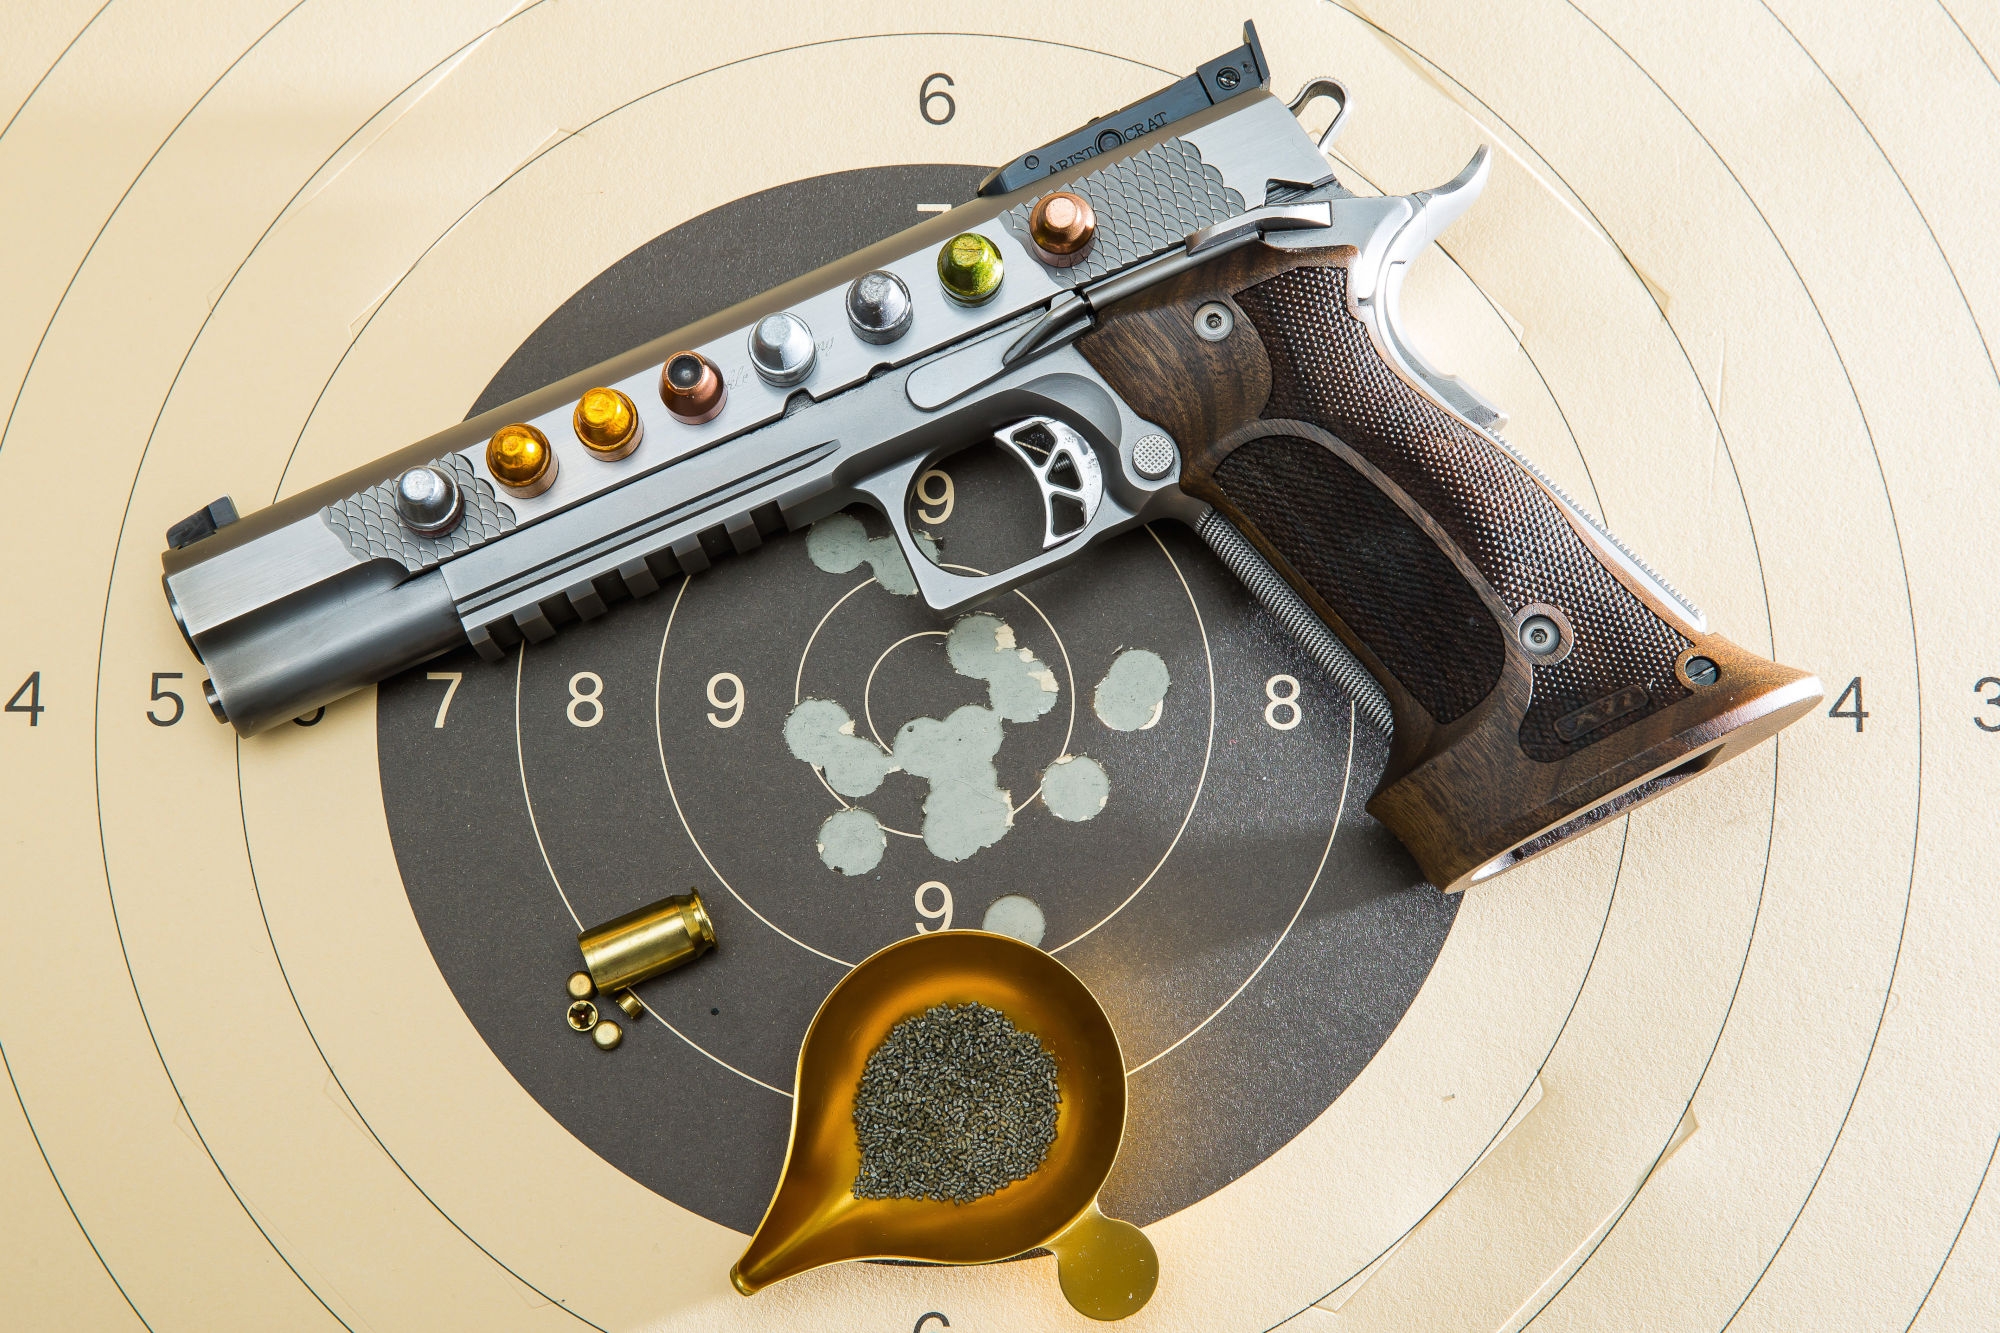 https://www.all4shooters.com/en/shooting/ammunition/45-acp-tips-and-tricks-for-reloading-the-handgun-cartridge/45-acp-tips-and-tricks-for-reloading-details.jpg